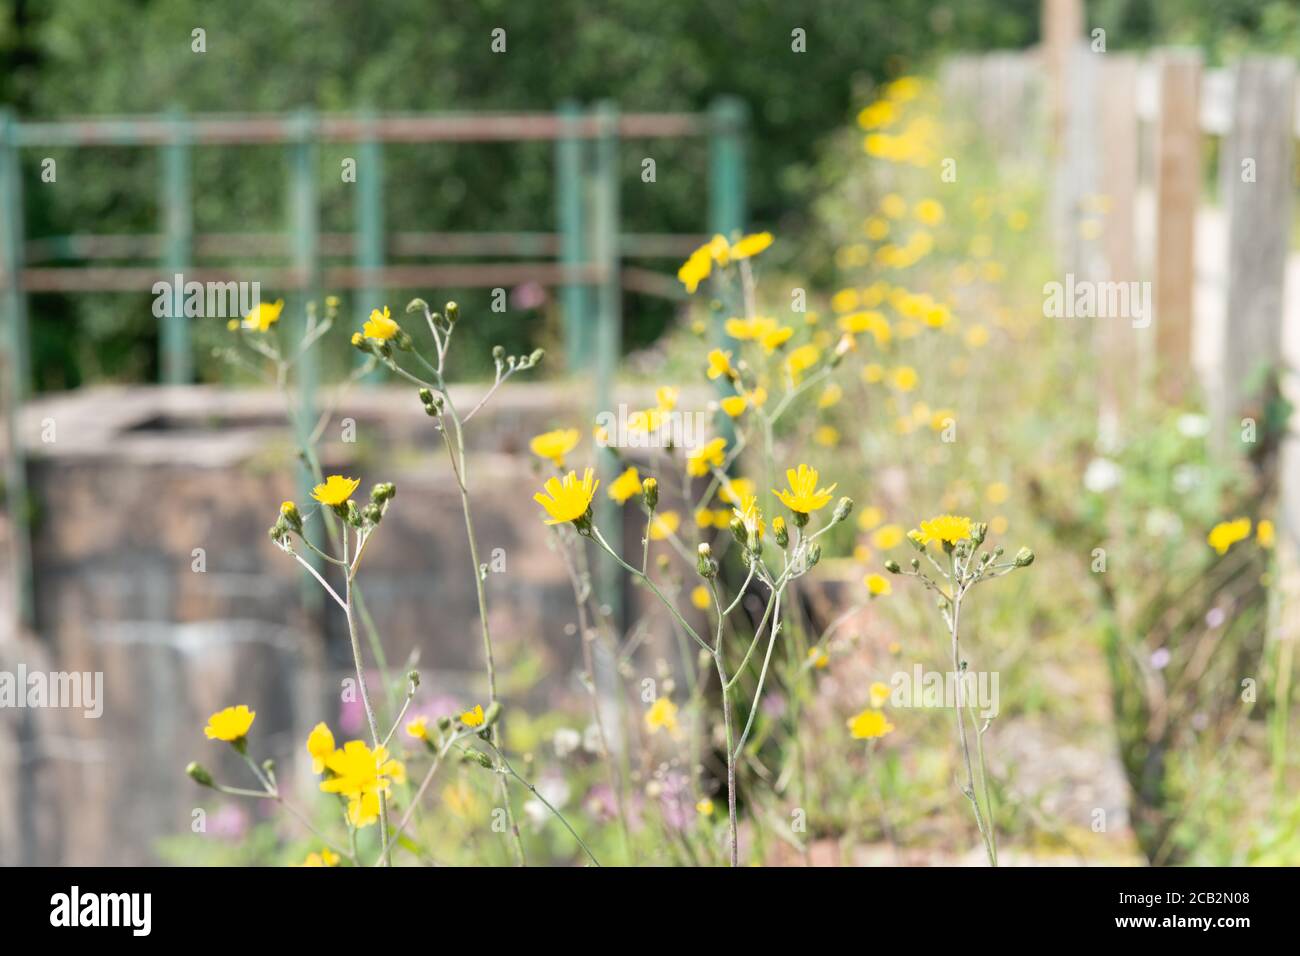 Hawkweed flowers (Hieracium, hierakion), part of the Asteraceae family, sometimes confused with dandelion, growing at the side of a canal. England, UK Stock Photo